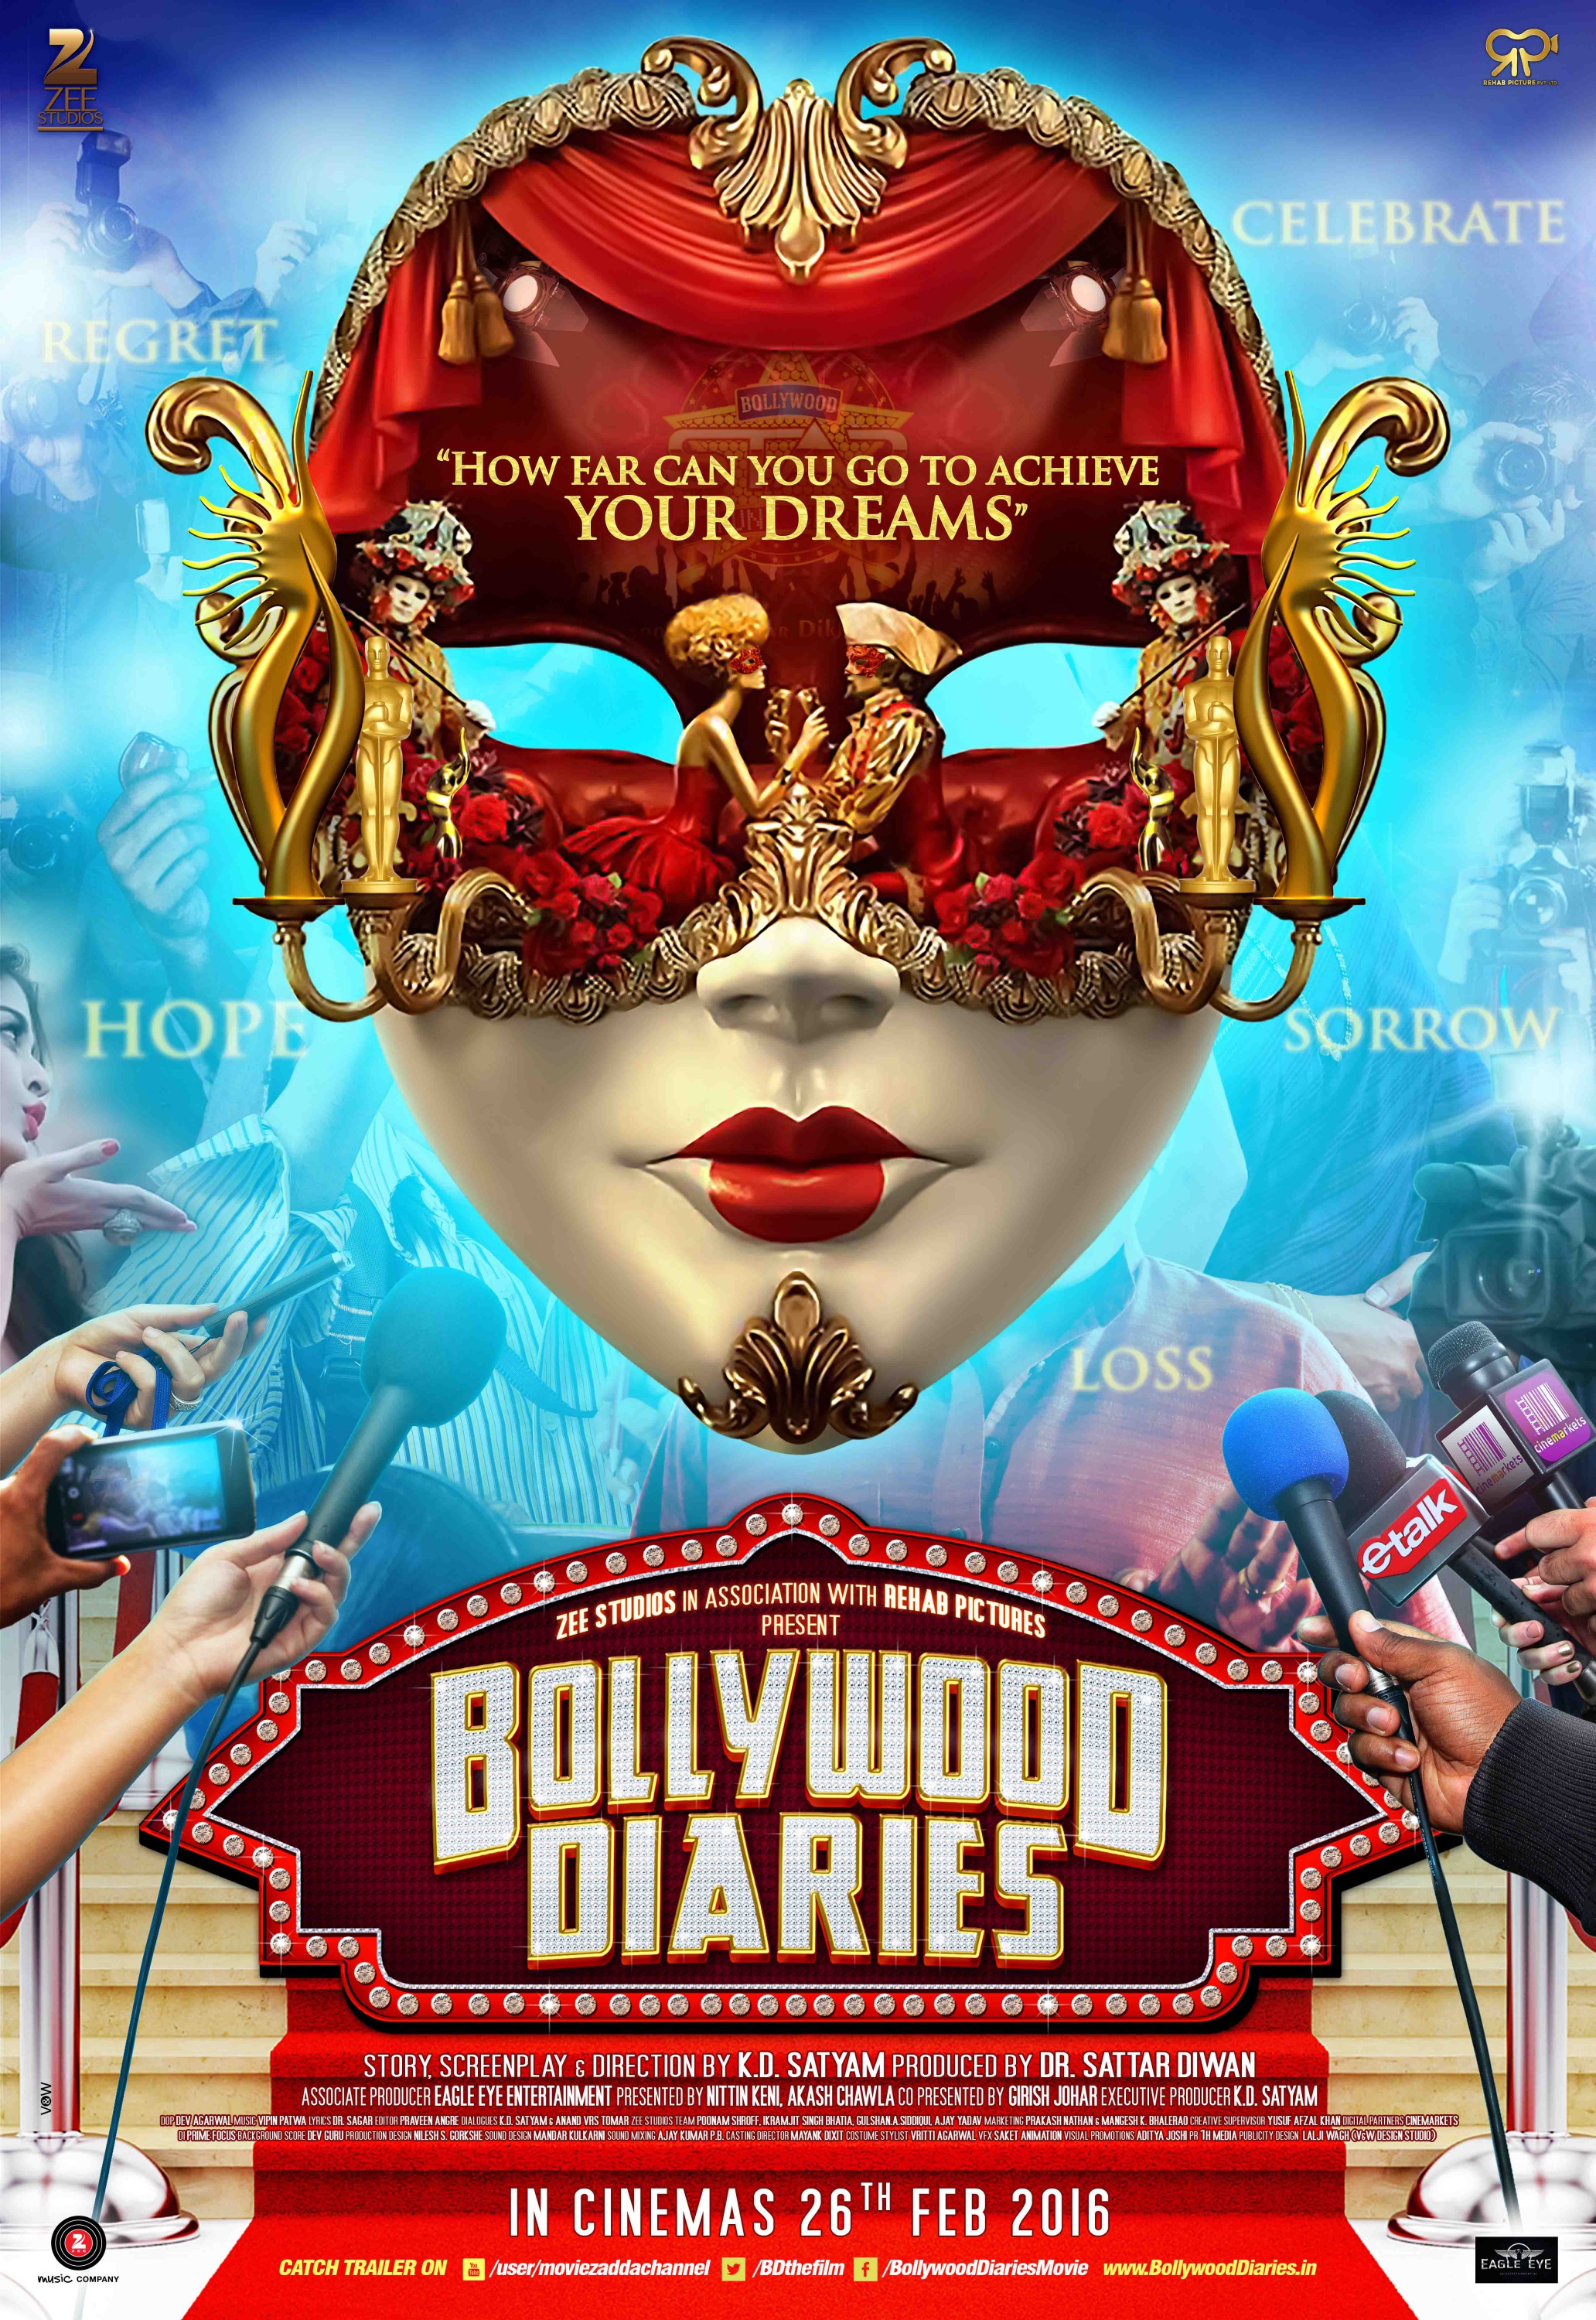 Mega Sized Movie Poster Image for Bollywood Diaries (#10 of 11)